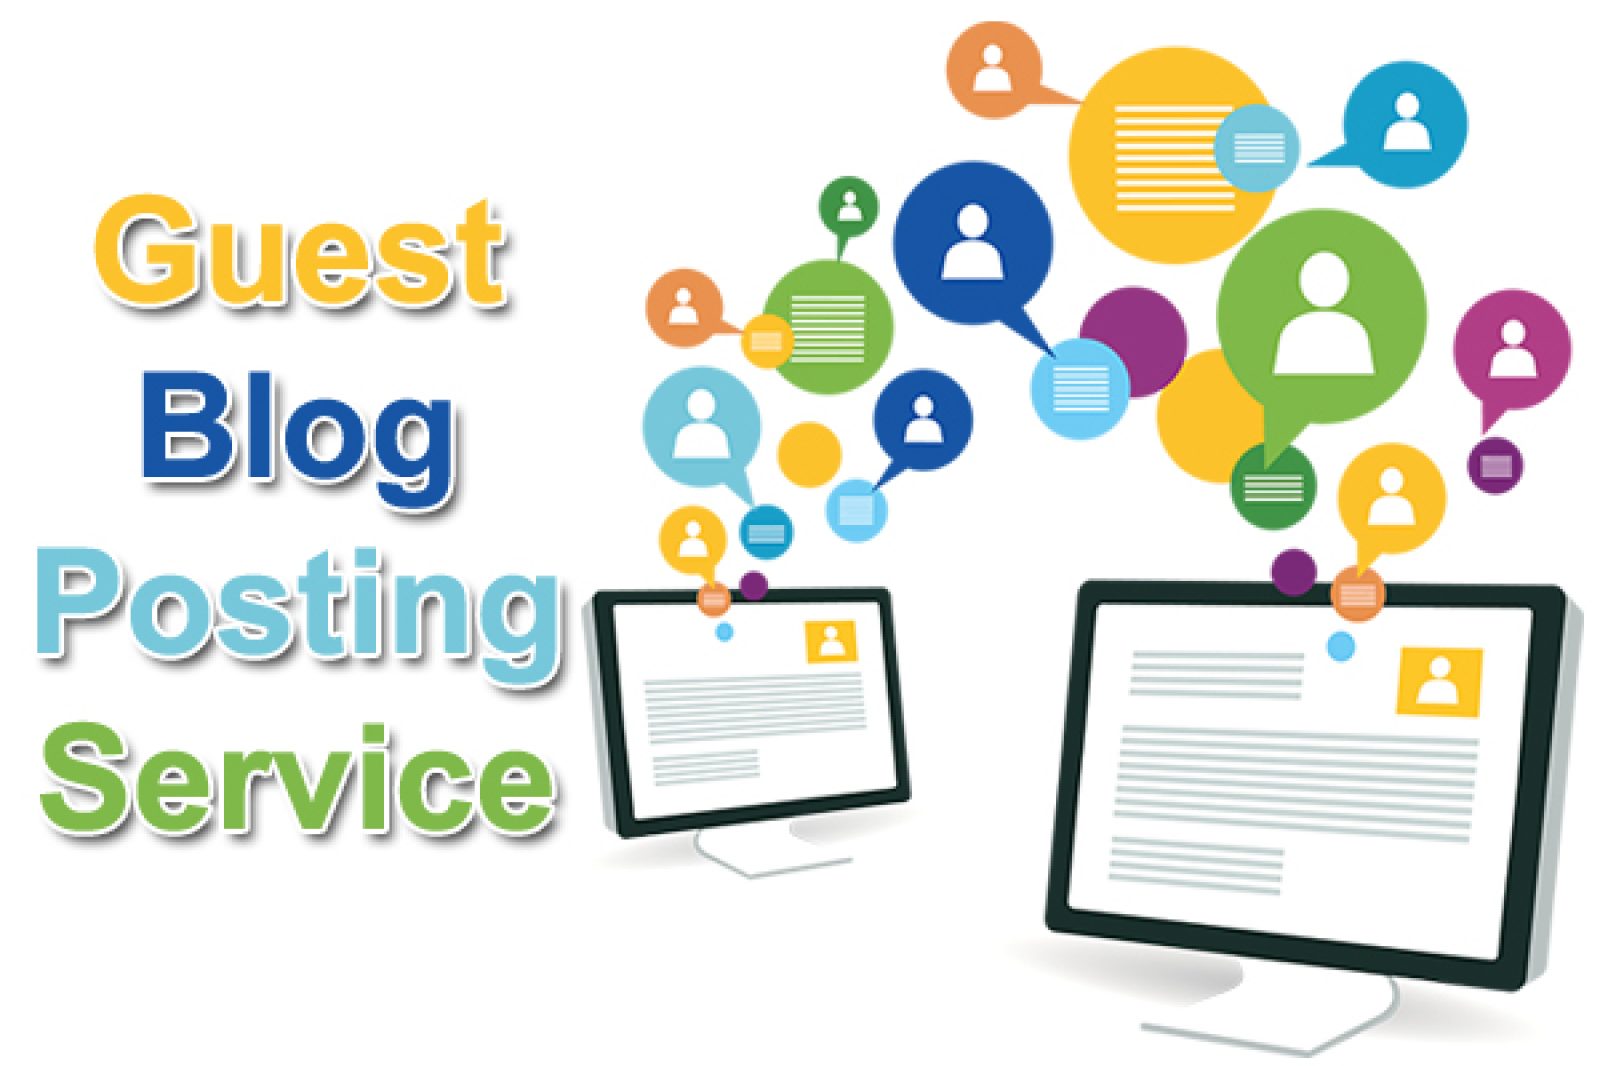 Maximize Your Exposure With an Effective Guest Posting Service